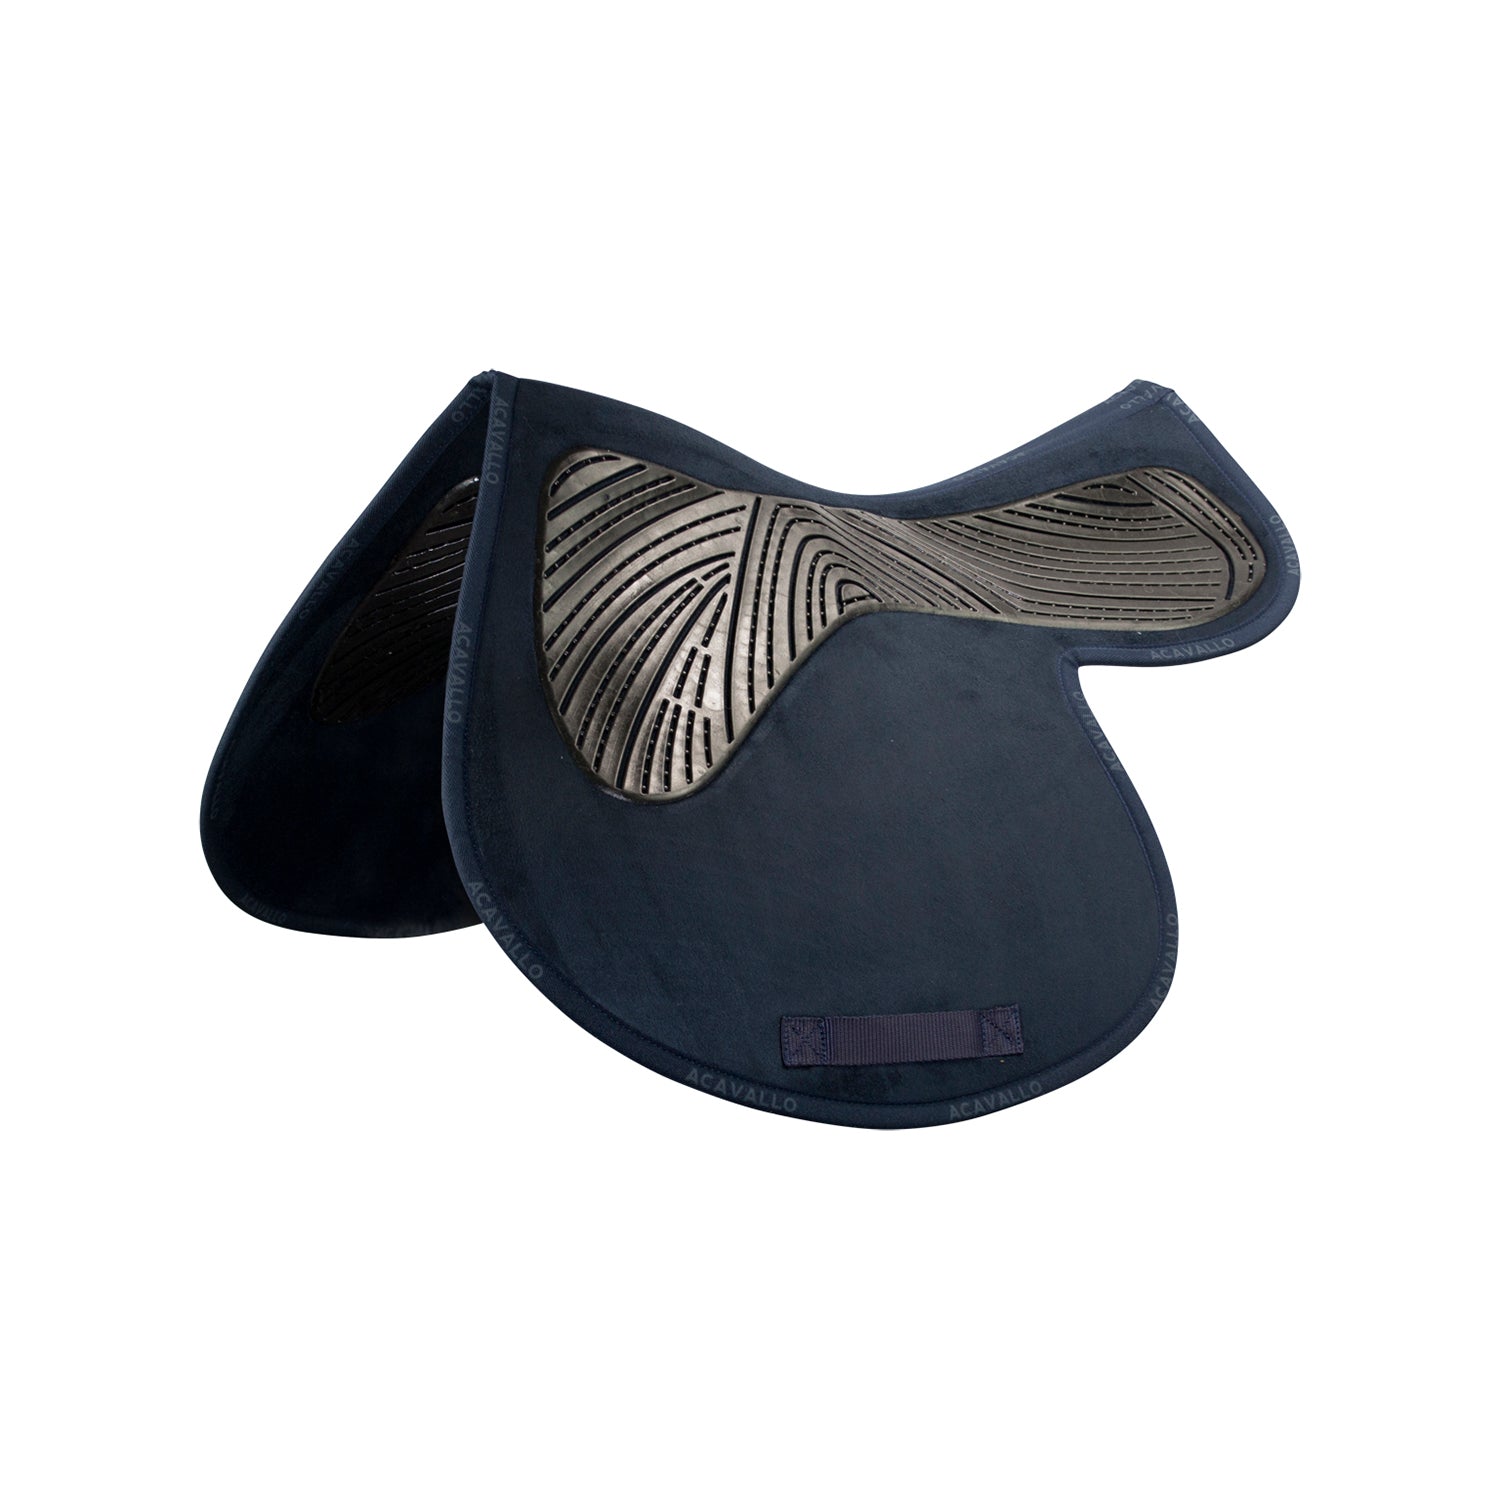 Pad Twin sided jumping numnah saddle pad gel classic - Reitstiefel Kandel - Dein Reitshop